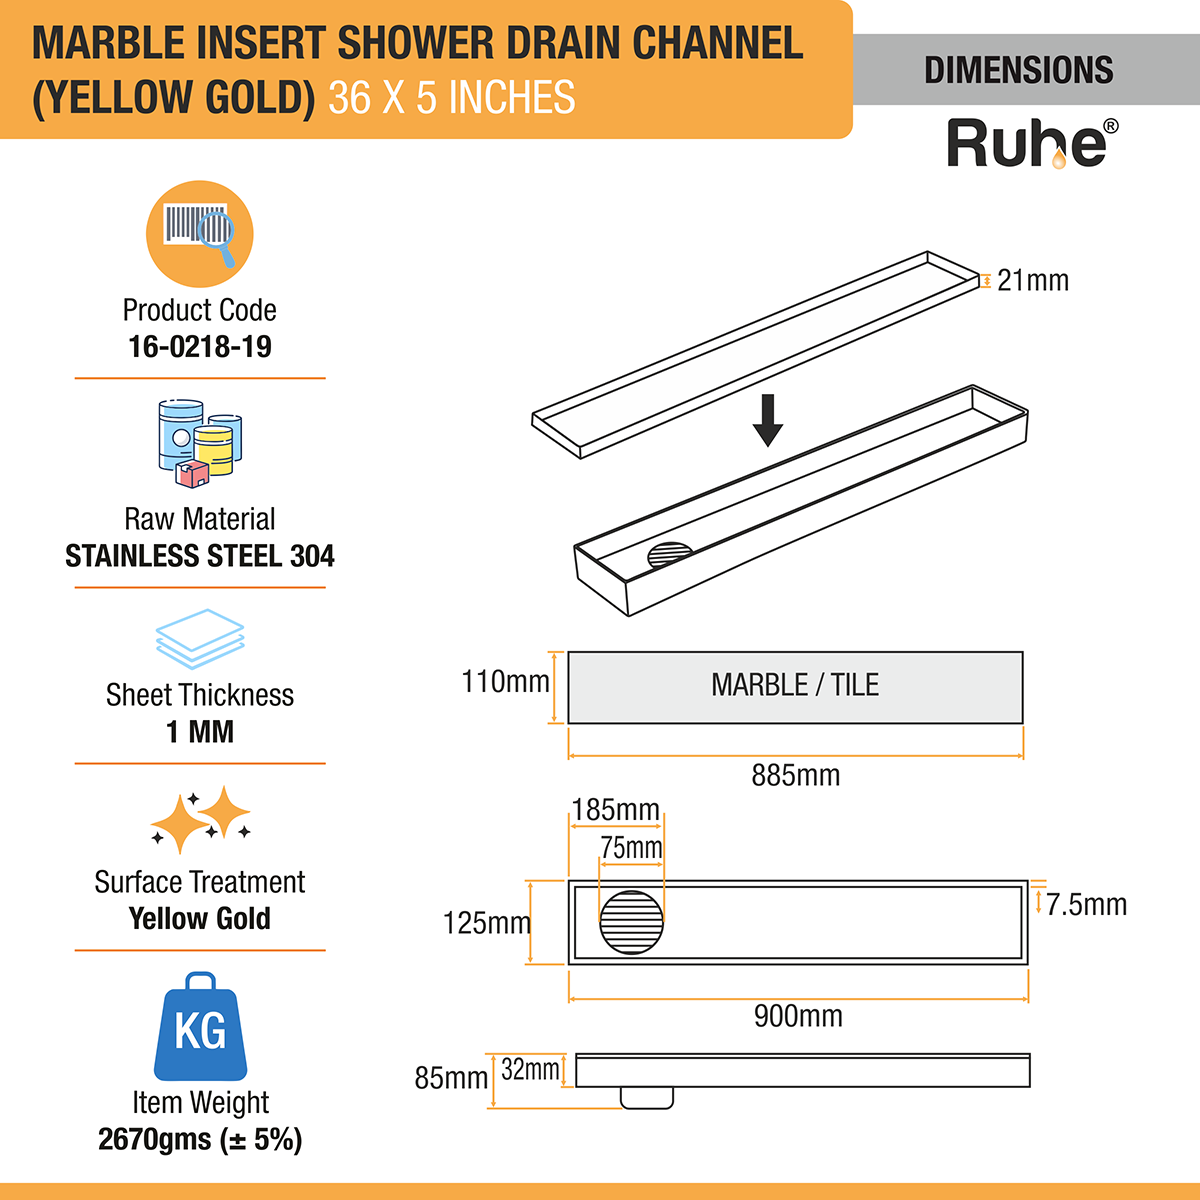 Marble Insert Shower Drain Channel (36 x 5 Inches) YELLOW GOLD PVD Coated dimensions and sizes